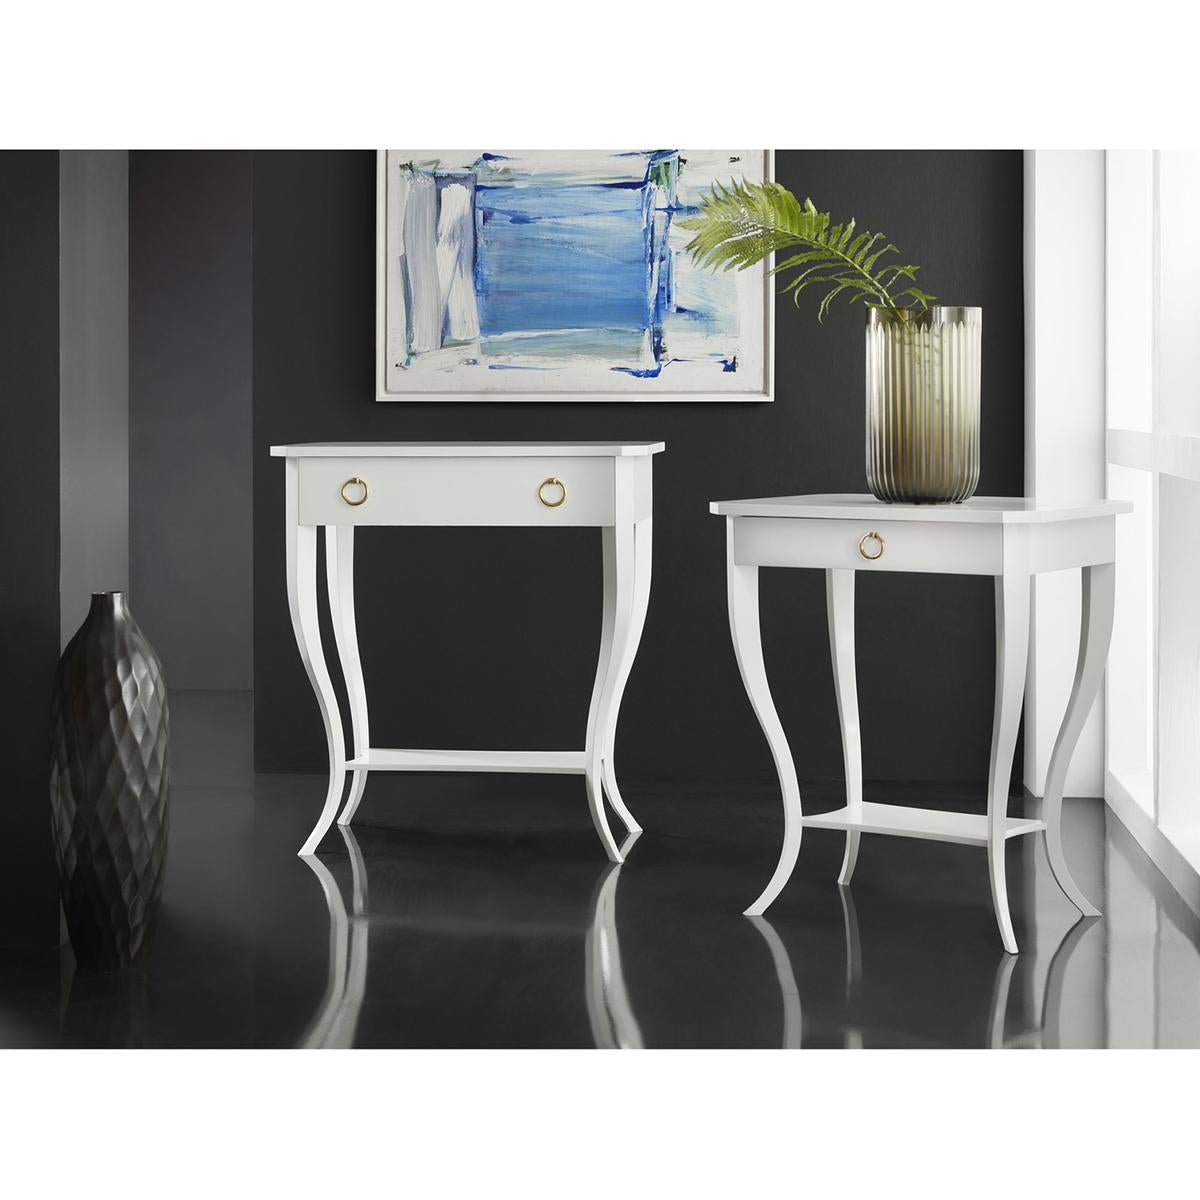 White Biedermeier Side Table, with a high gloss white lacquered finish. This delicate contemporary Neoclassic table has feminine curves with a single drawer with a brass ring pull, a flat top, and shelf stretcher.

Dimensions: 24.75